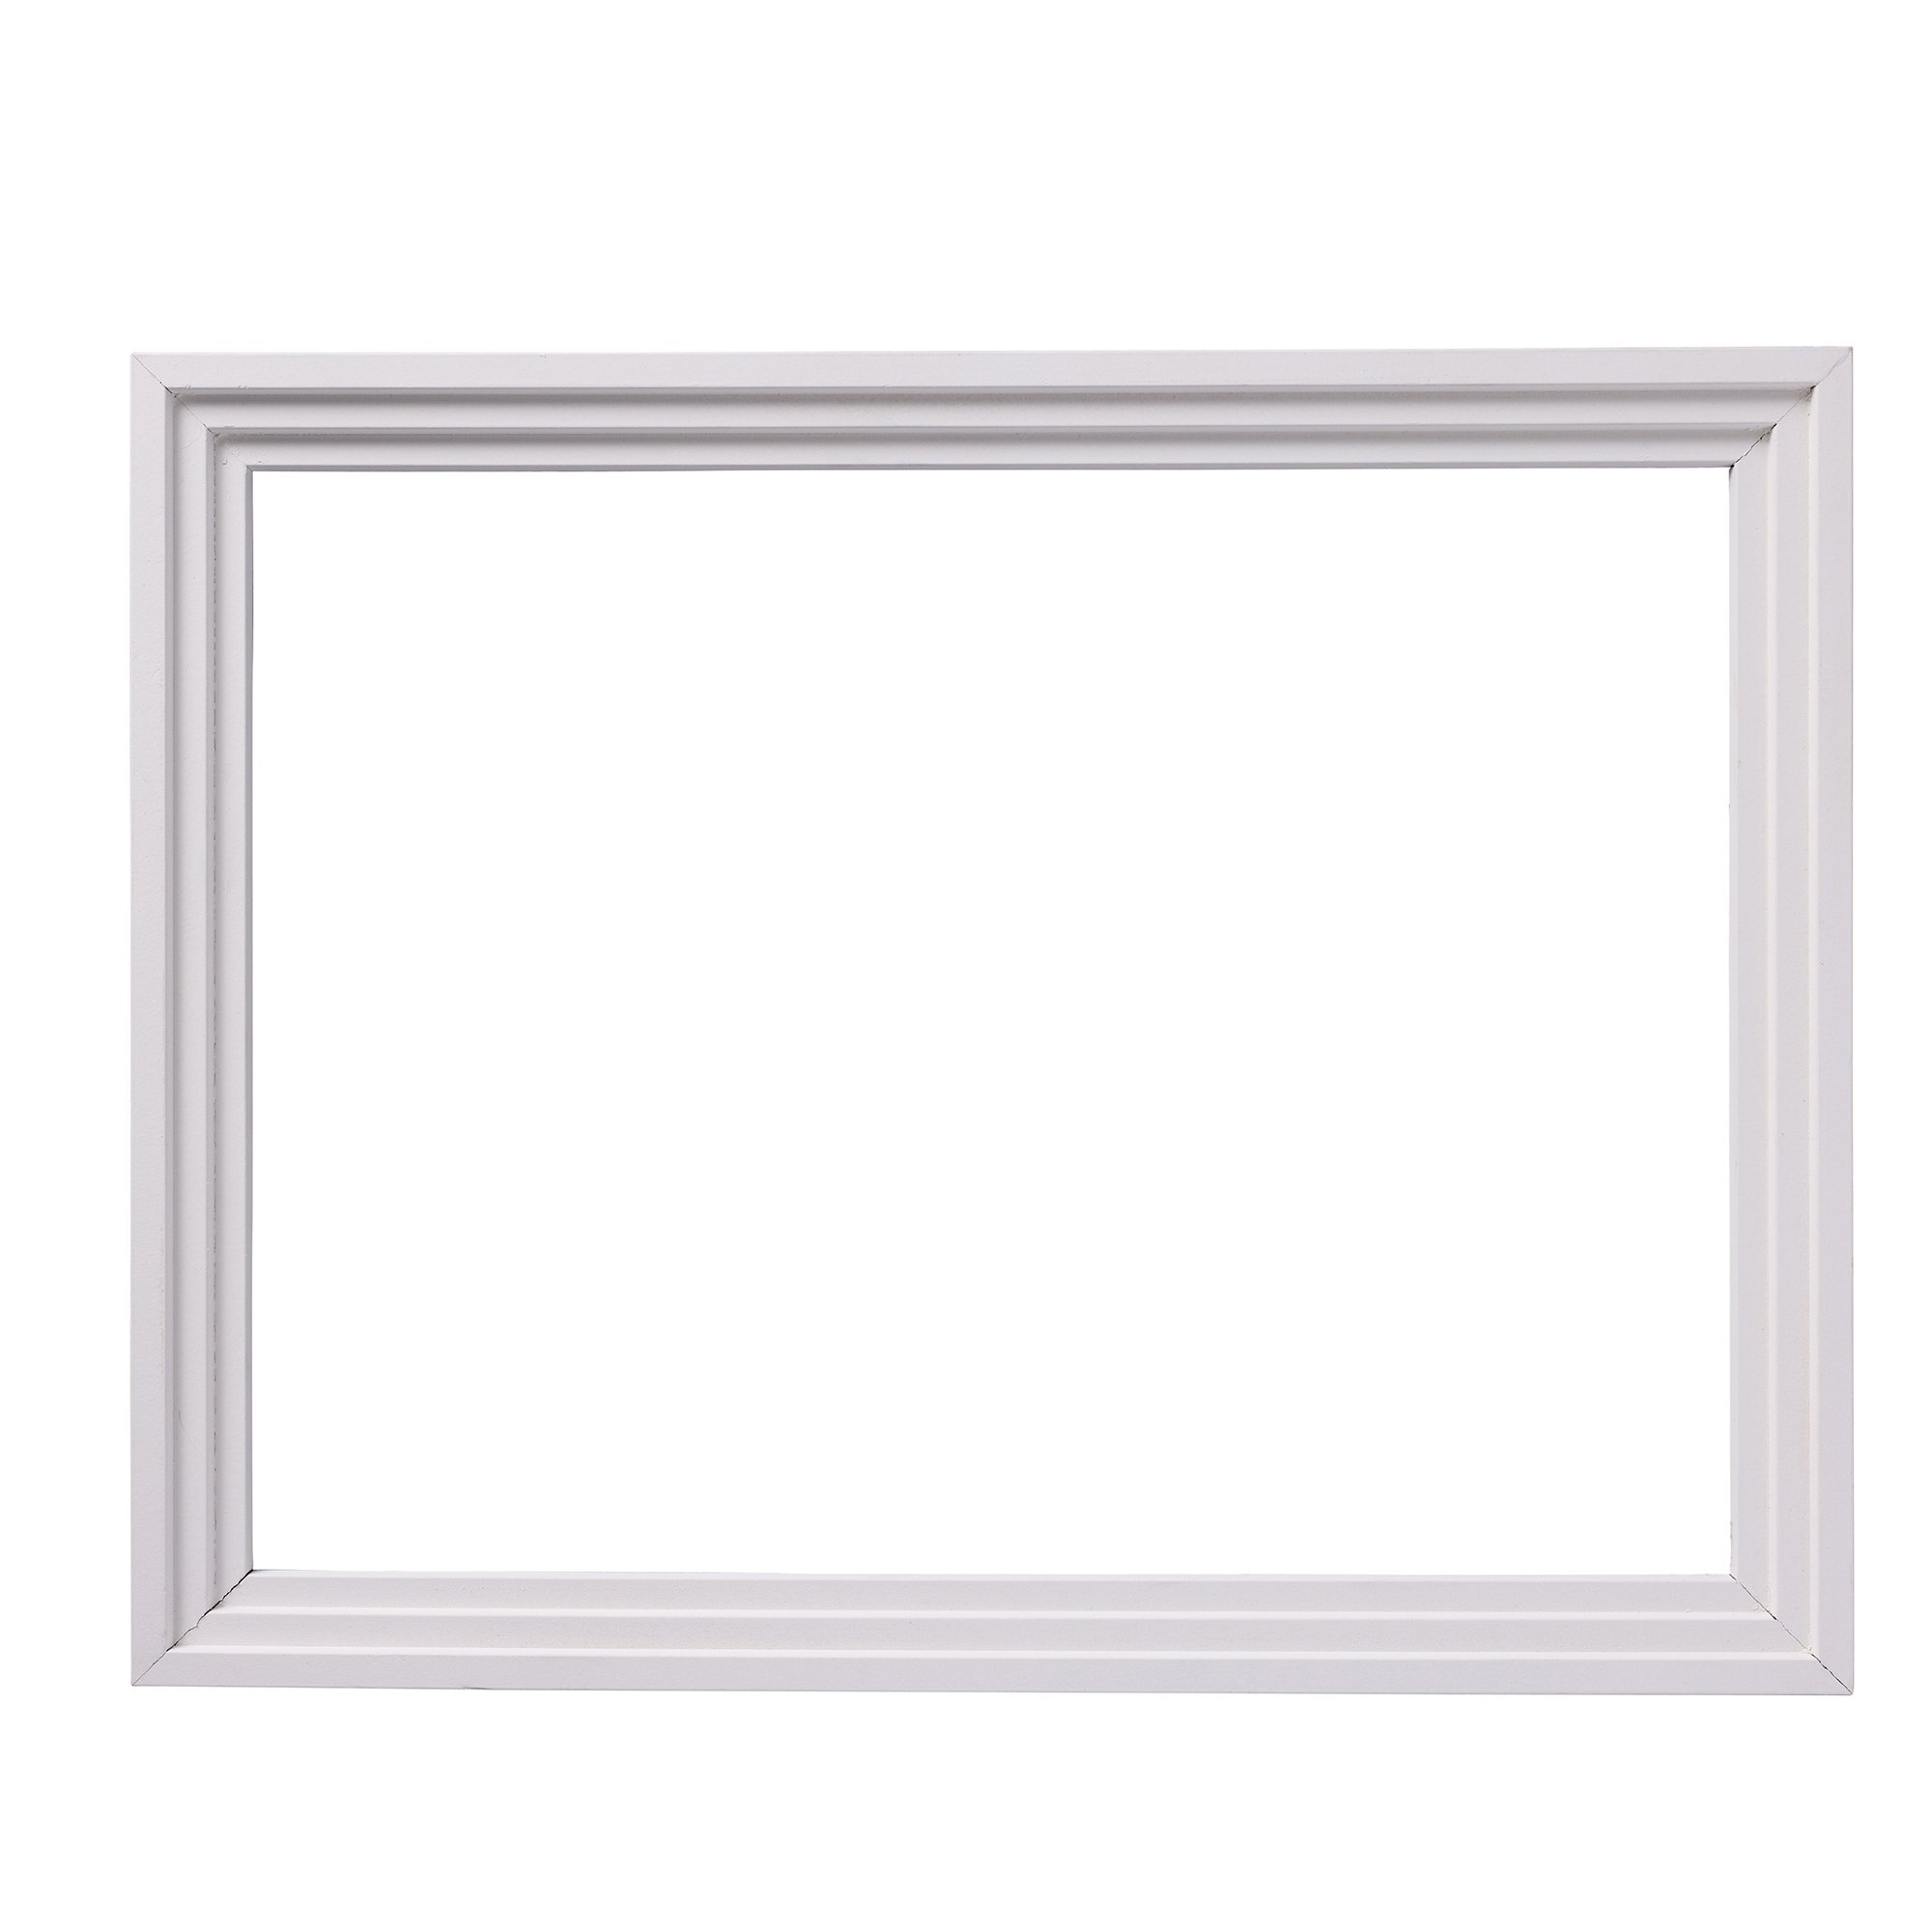 20511-FRMFJP Sawtooth Picture Frame Moulding